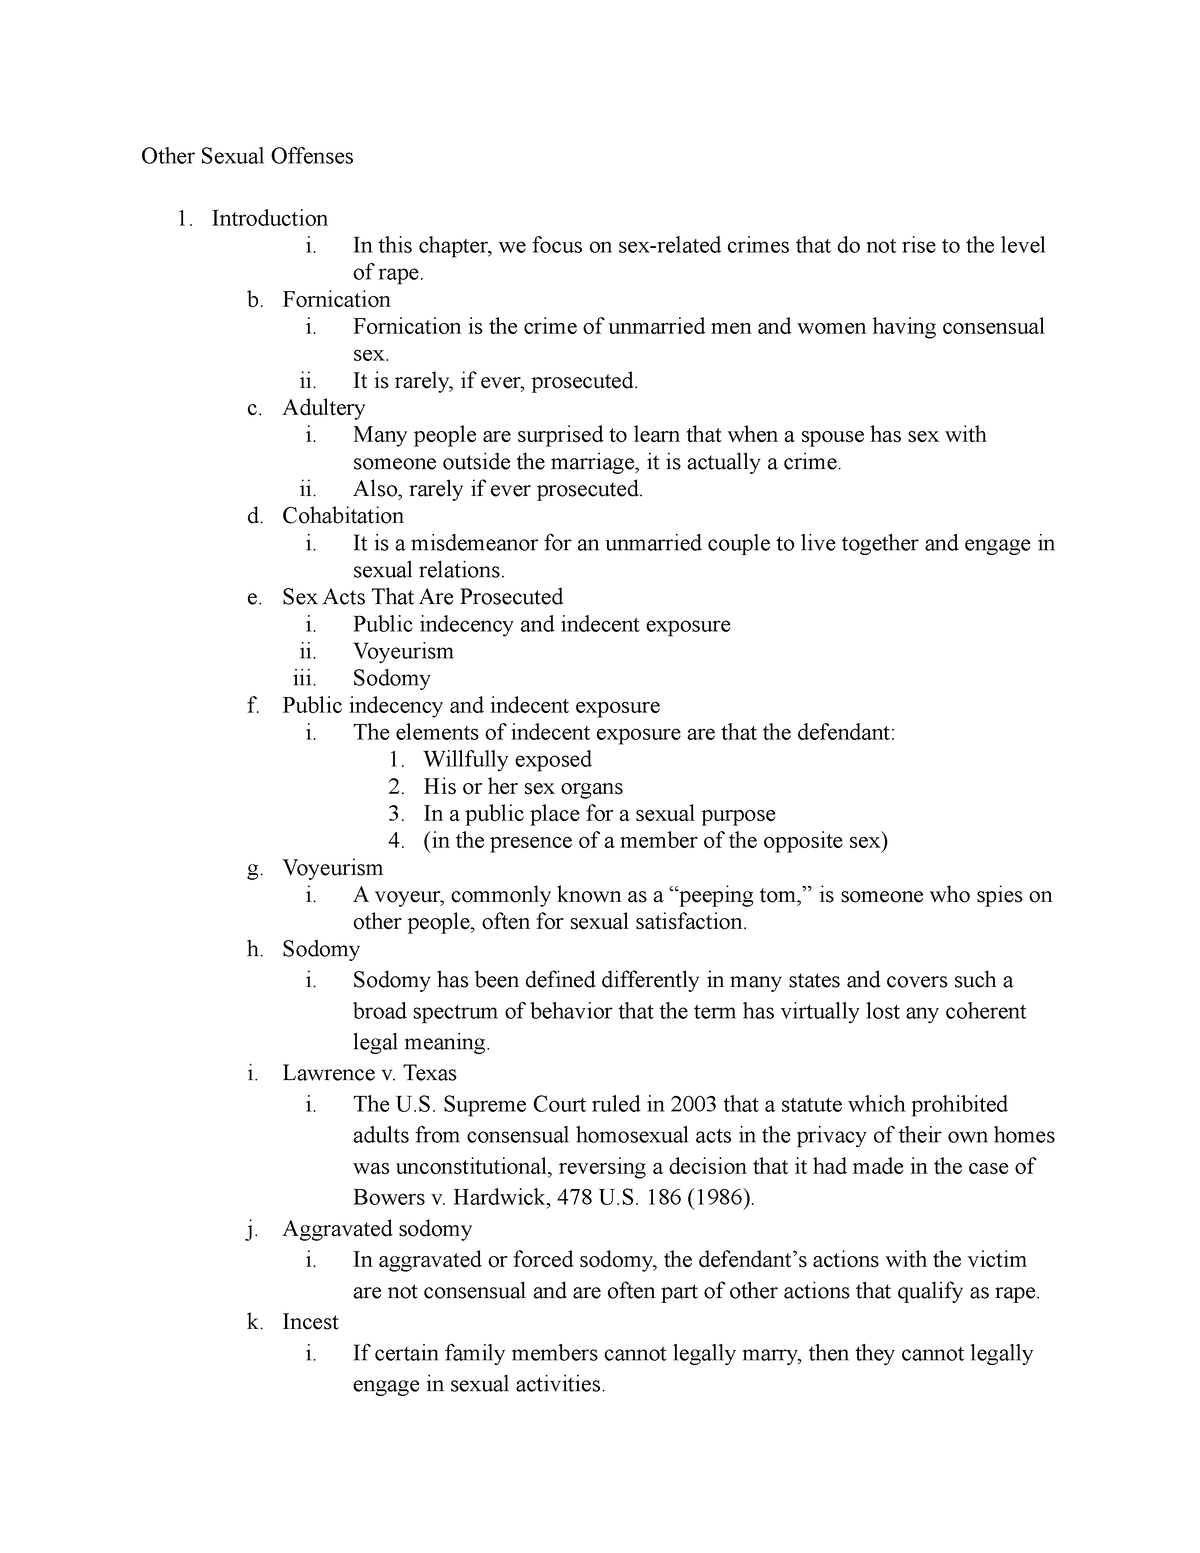 Chapter 9 - class notes - Other Sexual Offenses Introduction i